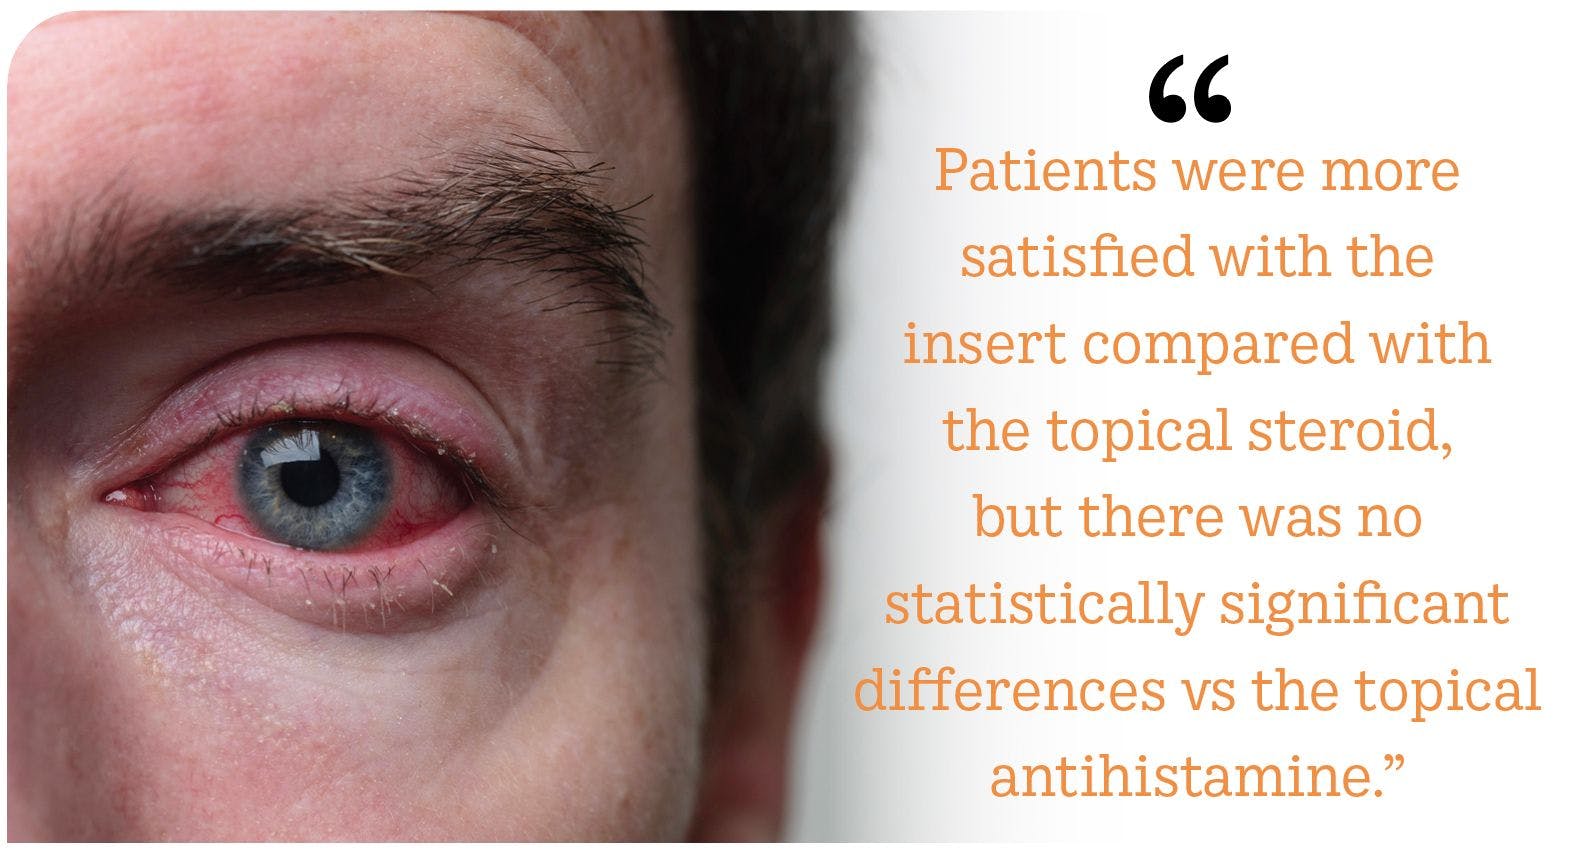 Quote: Patients were more satisfied with the insert compared with the topical steroid, but there was no statistically significant differences vs the topical antihistamine.